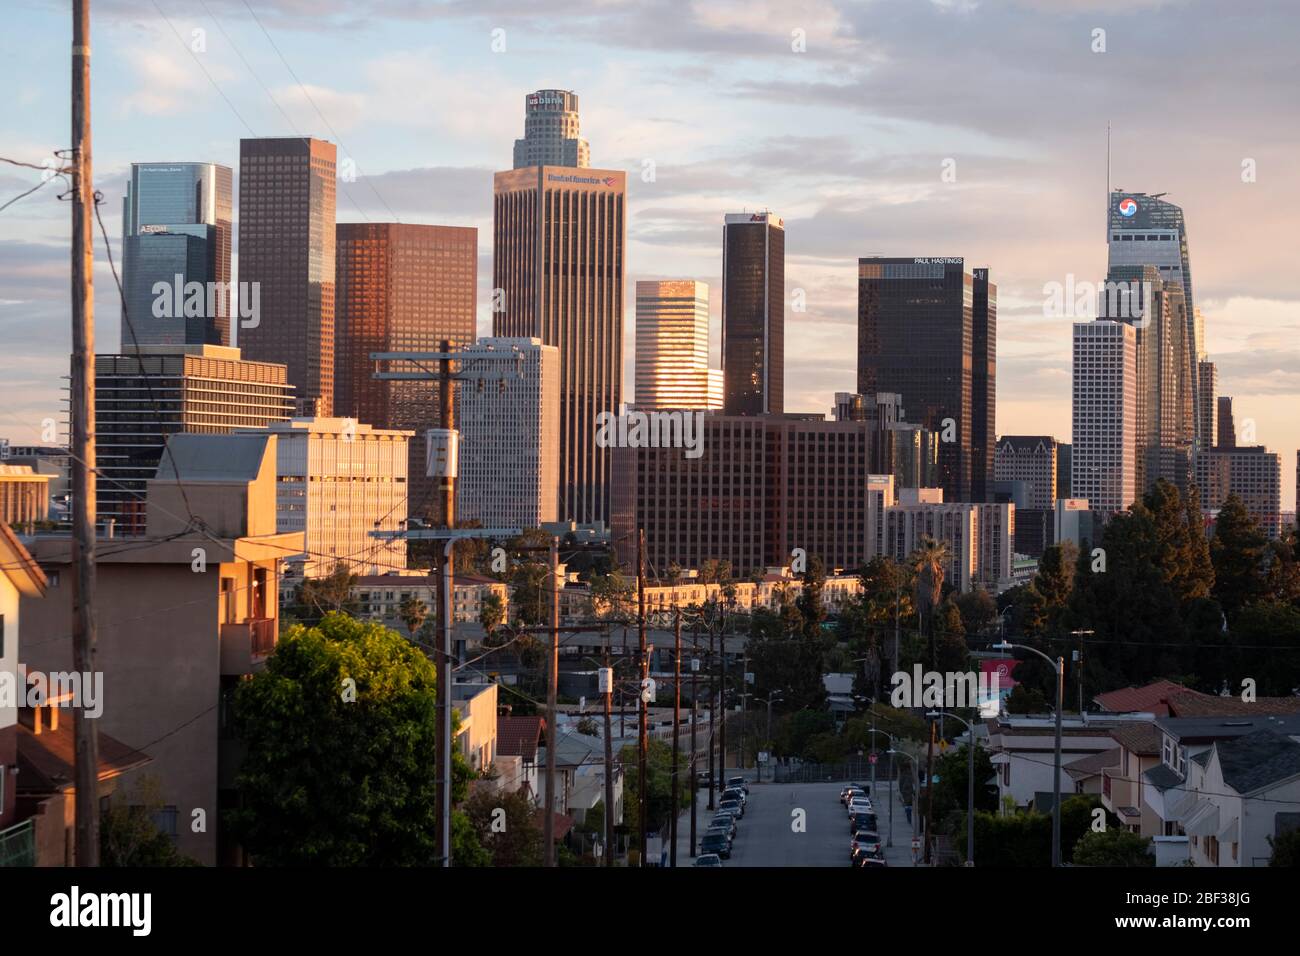 Gritty street view of downtown Los Angeles, LA skyline at sunset in the evening Stock Photo